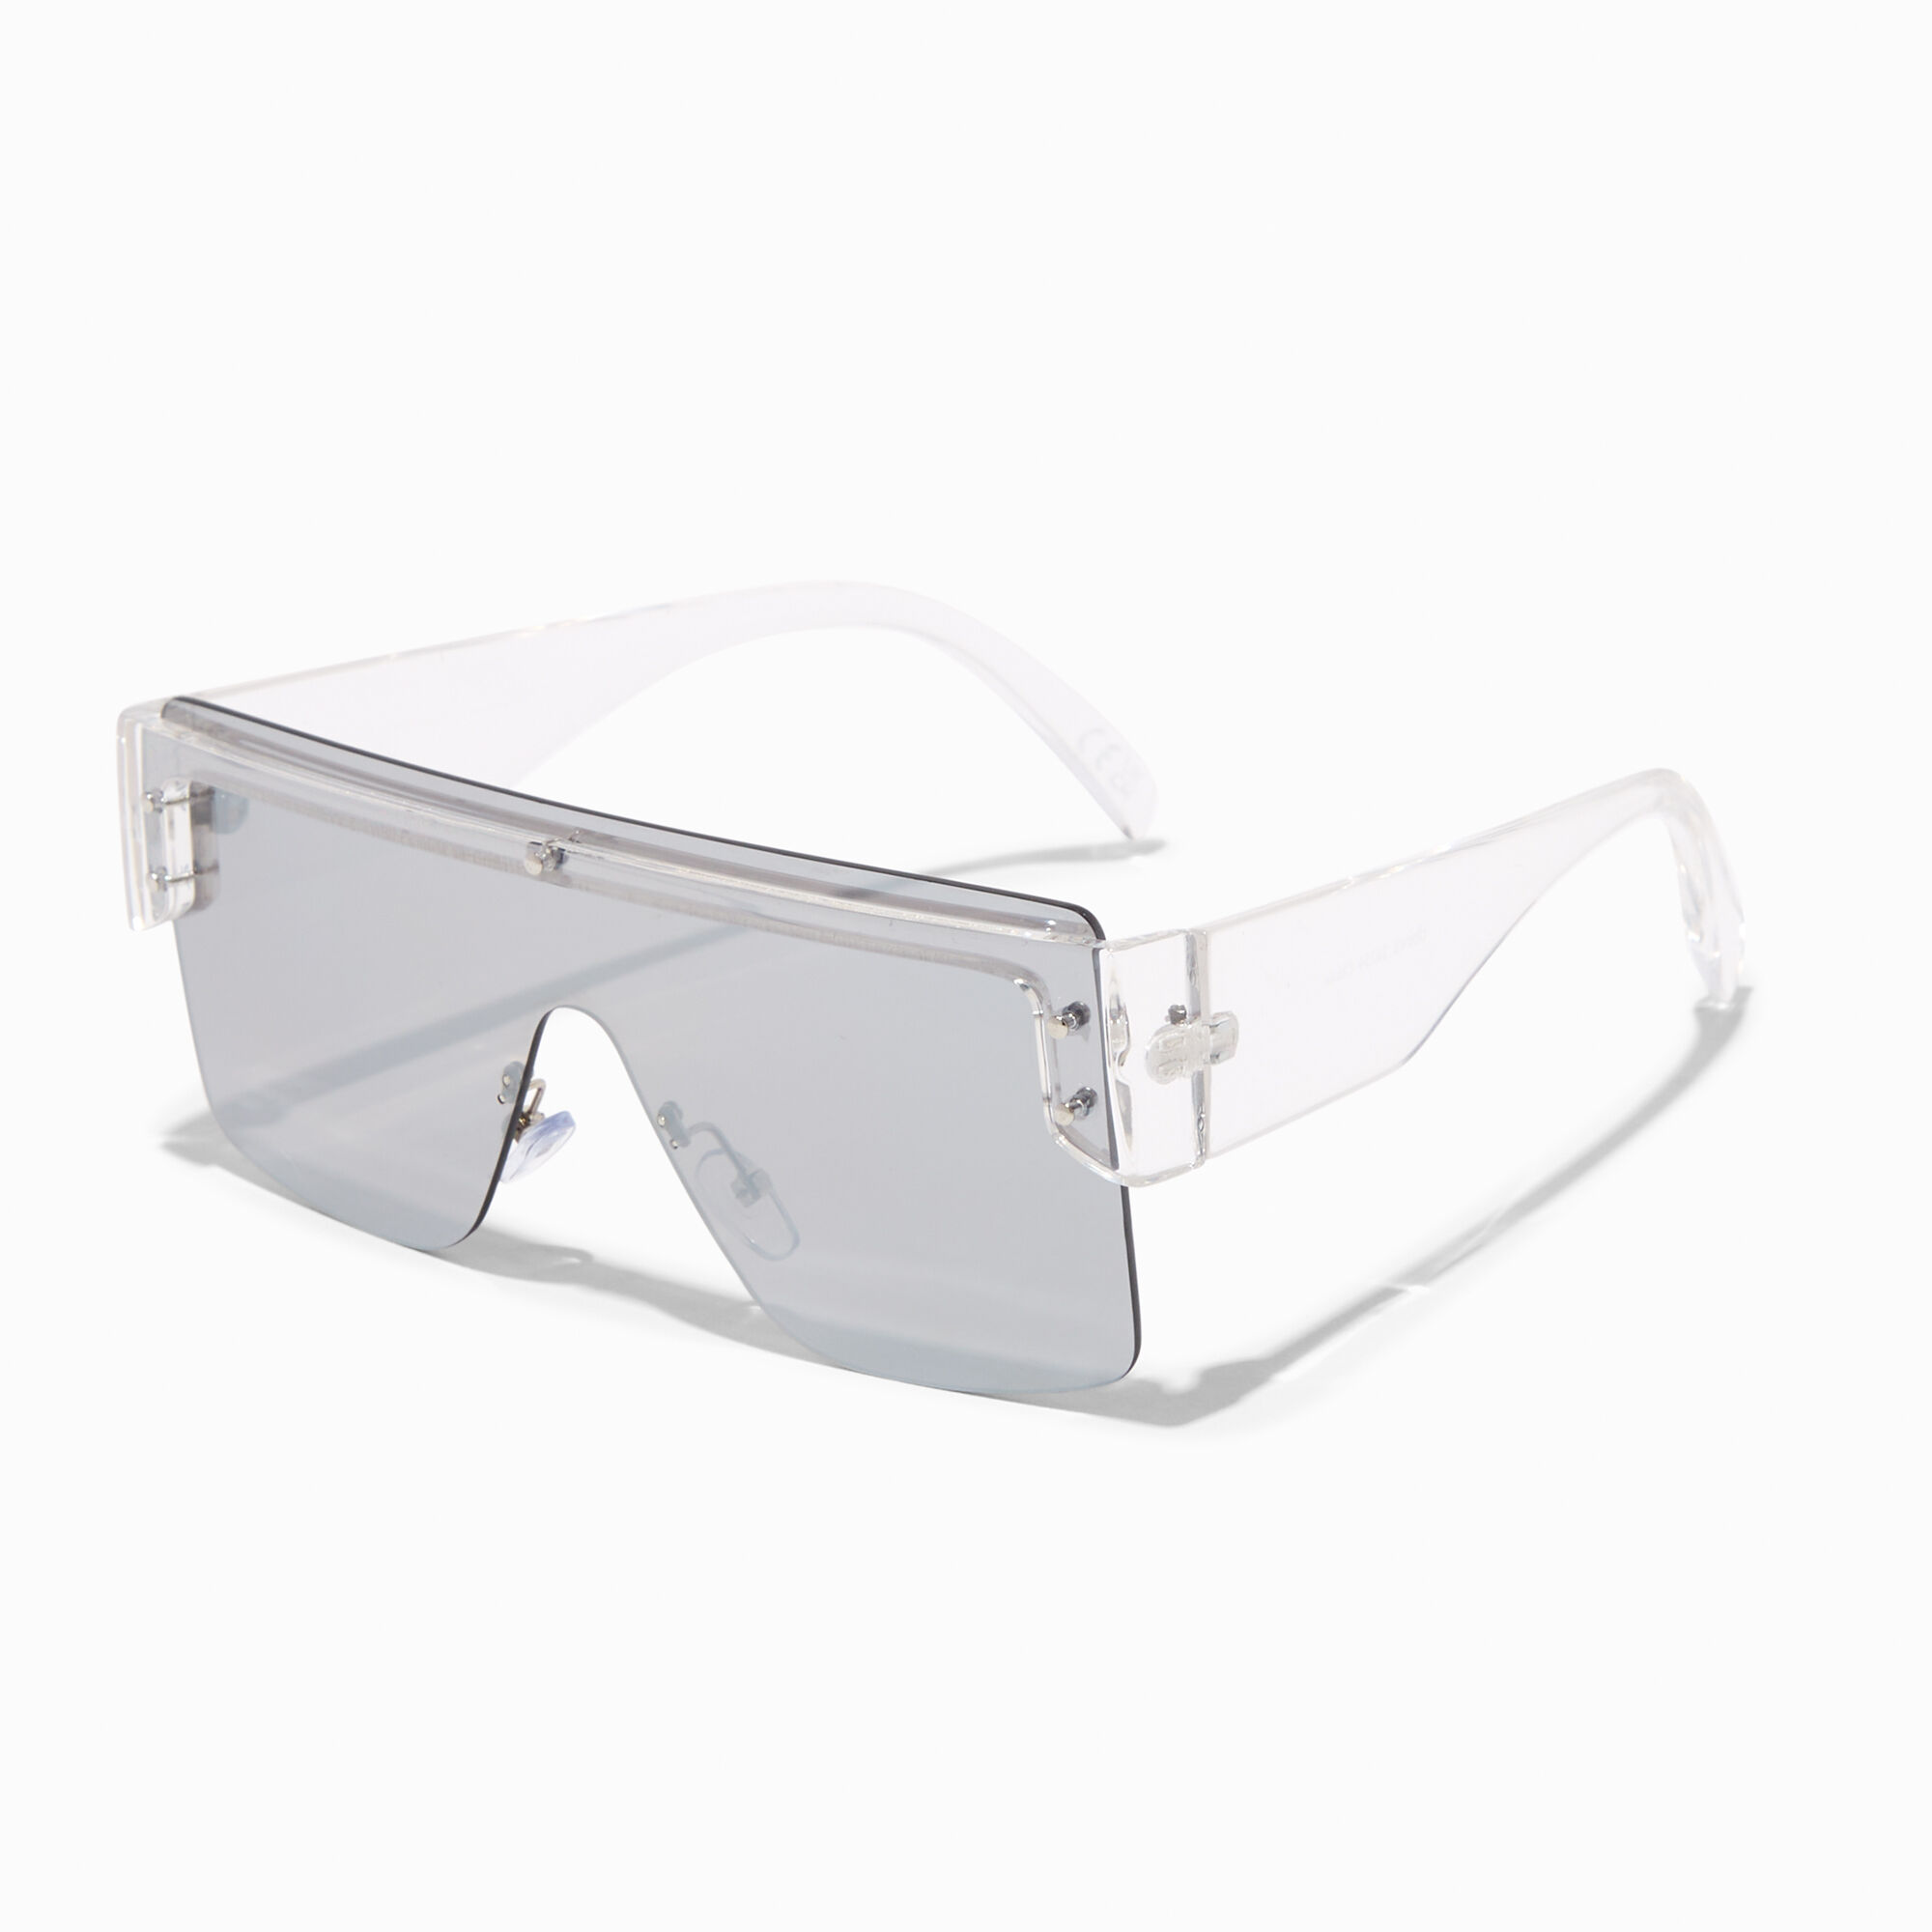 View Claires Shield Clear Sunglasses Gray information